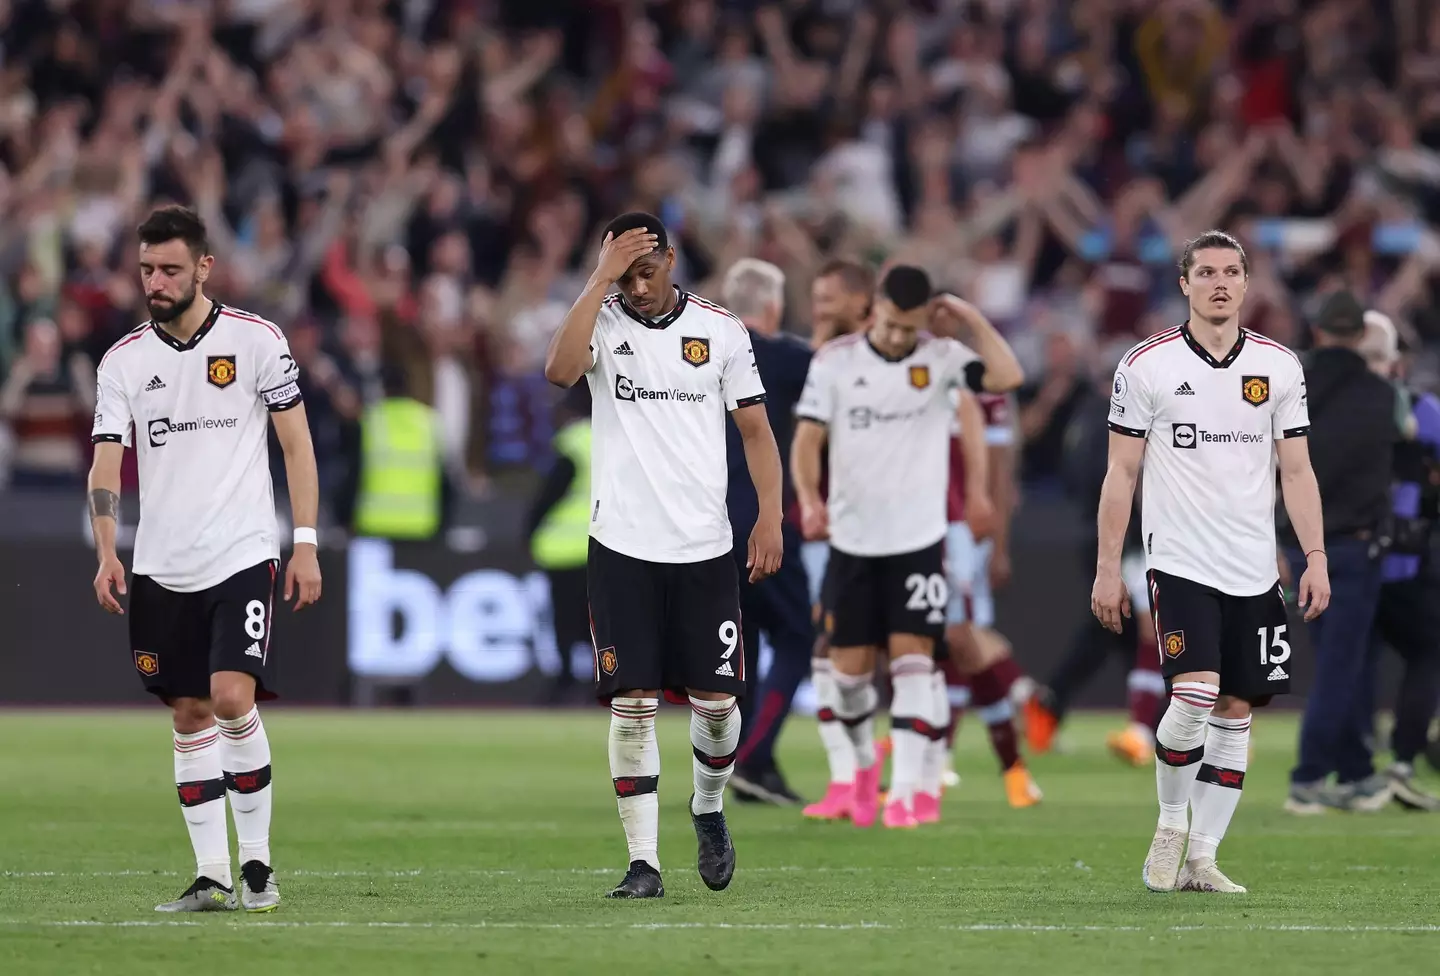 Manchester United players look dejected following the defeat at West Ham United. Image: Alamy